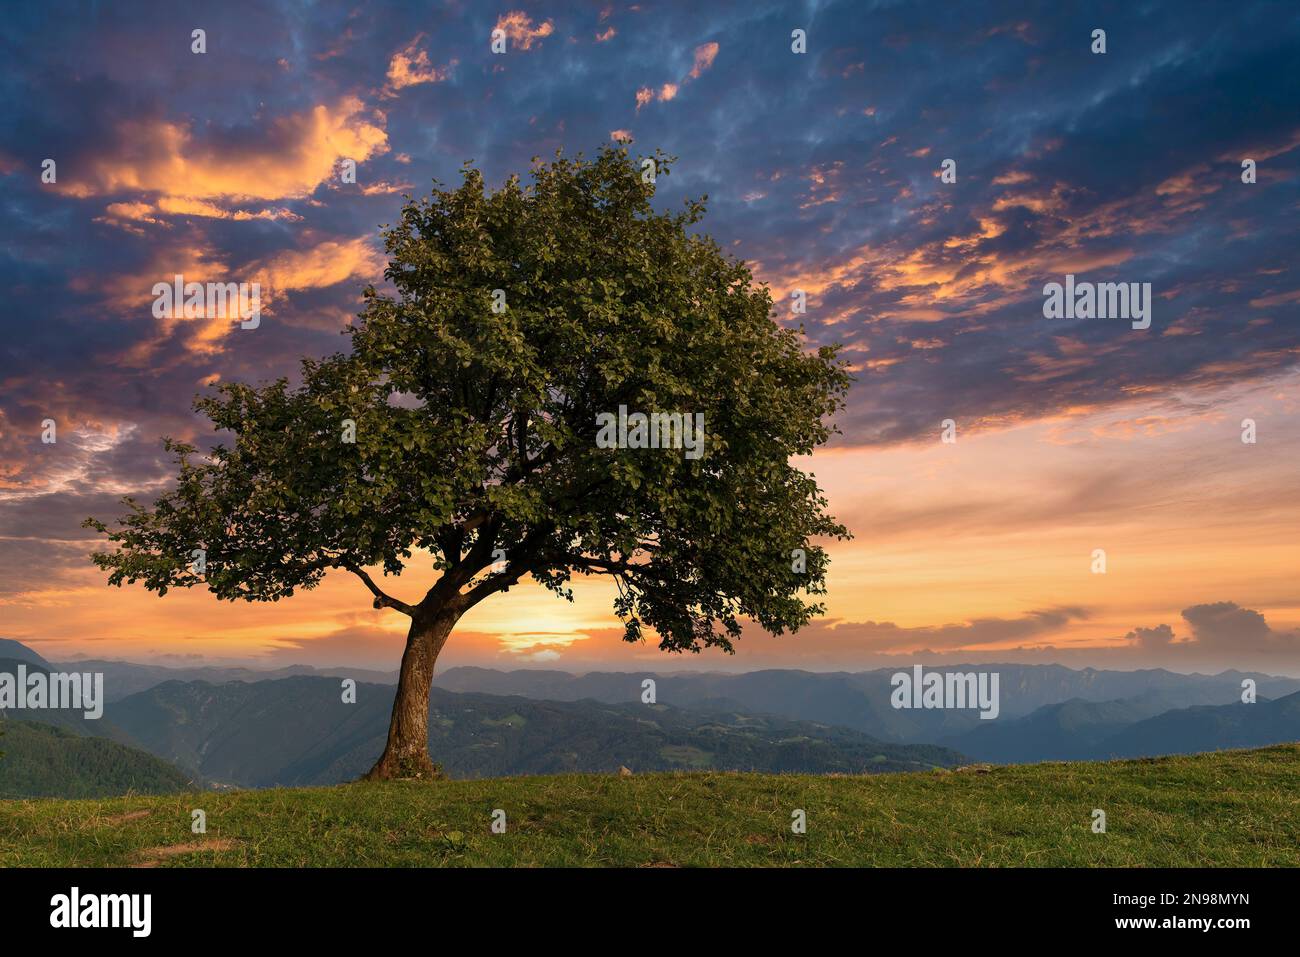 Lonely tree on the mountain meadow and majestic sunset sky. Stock Photo